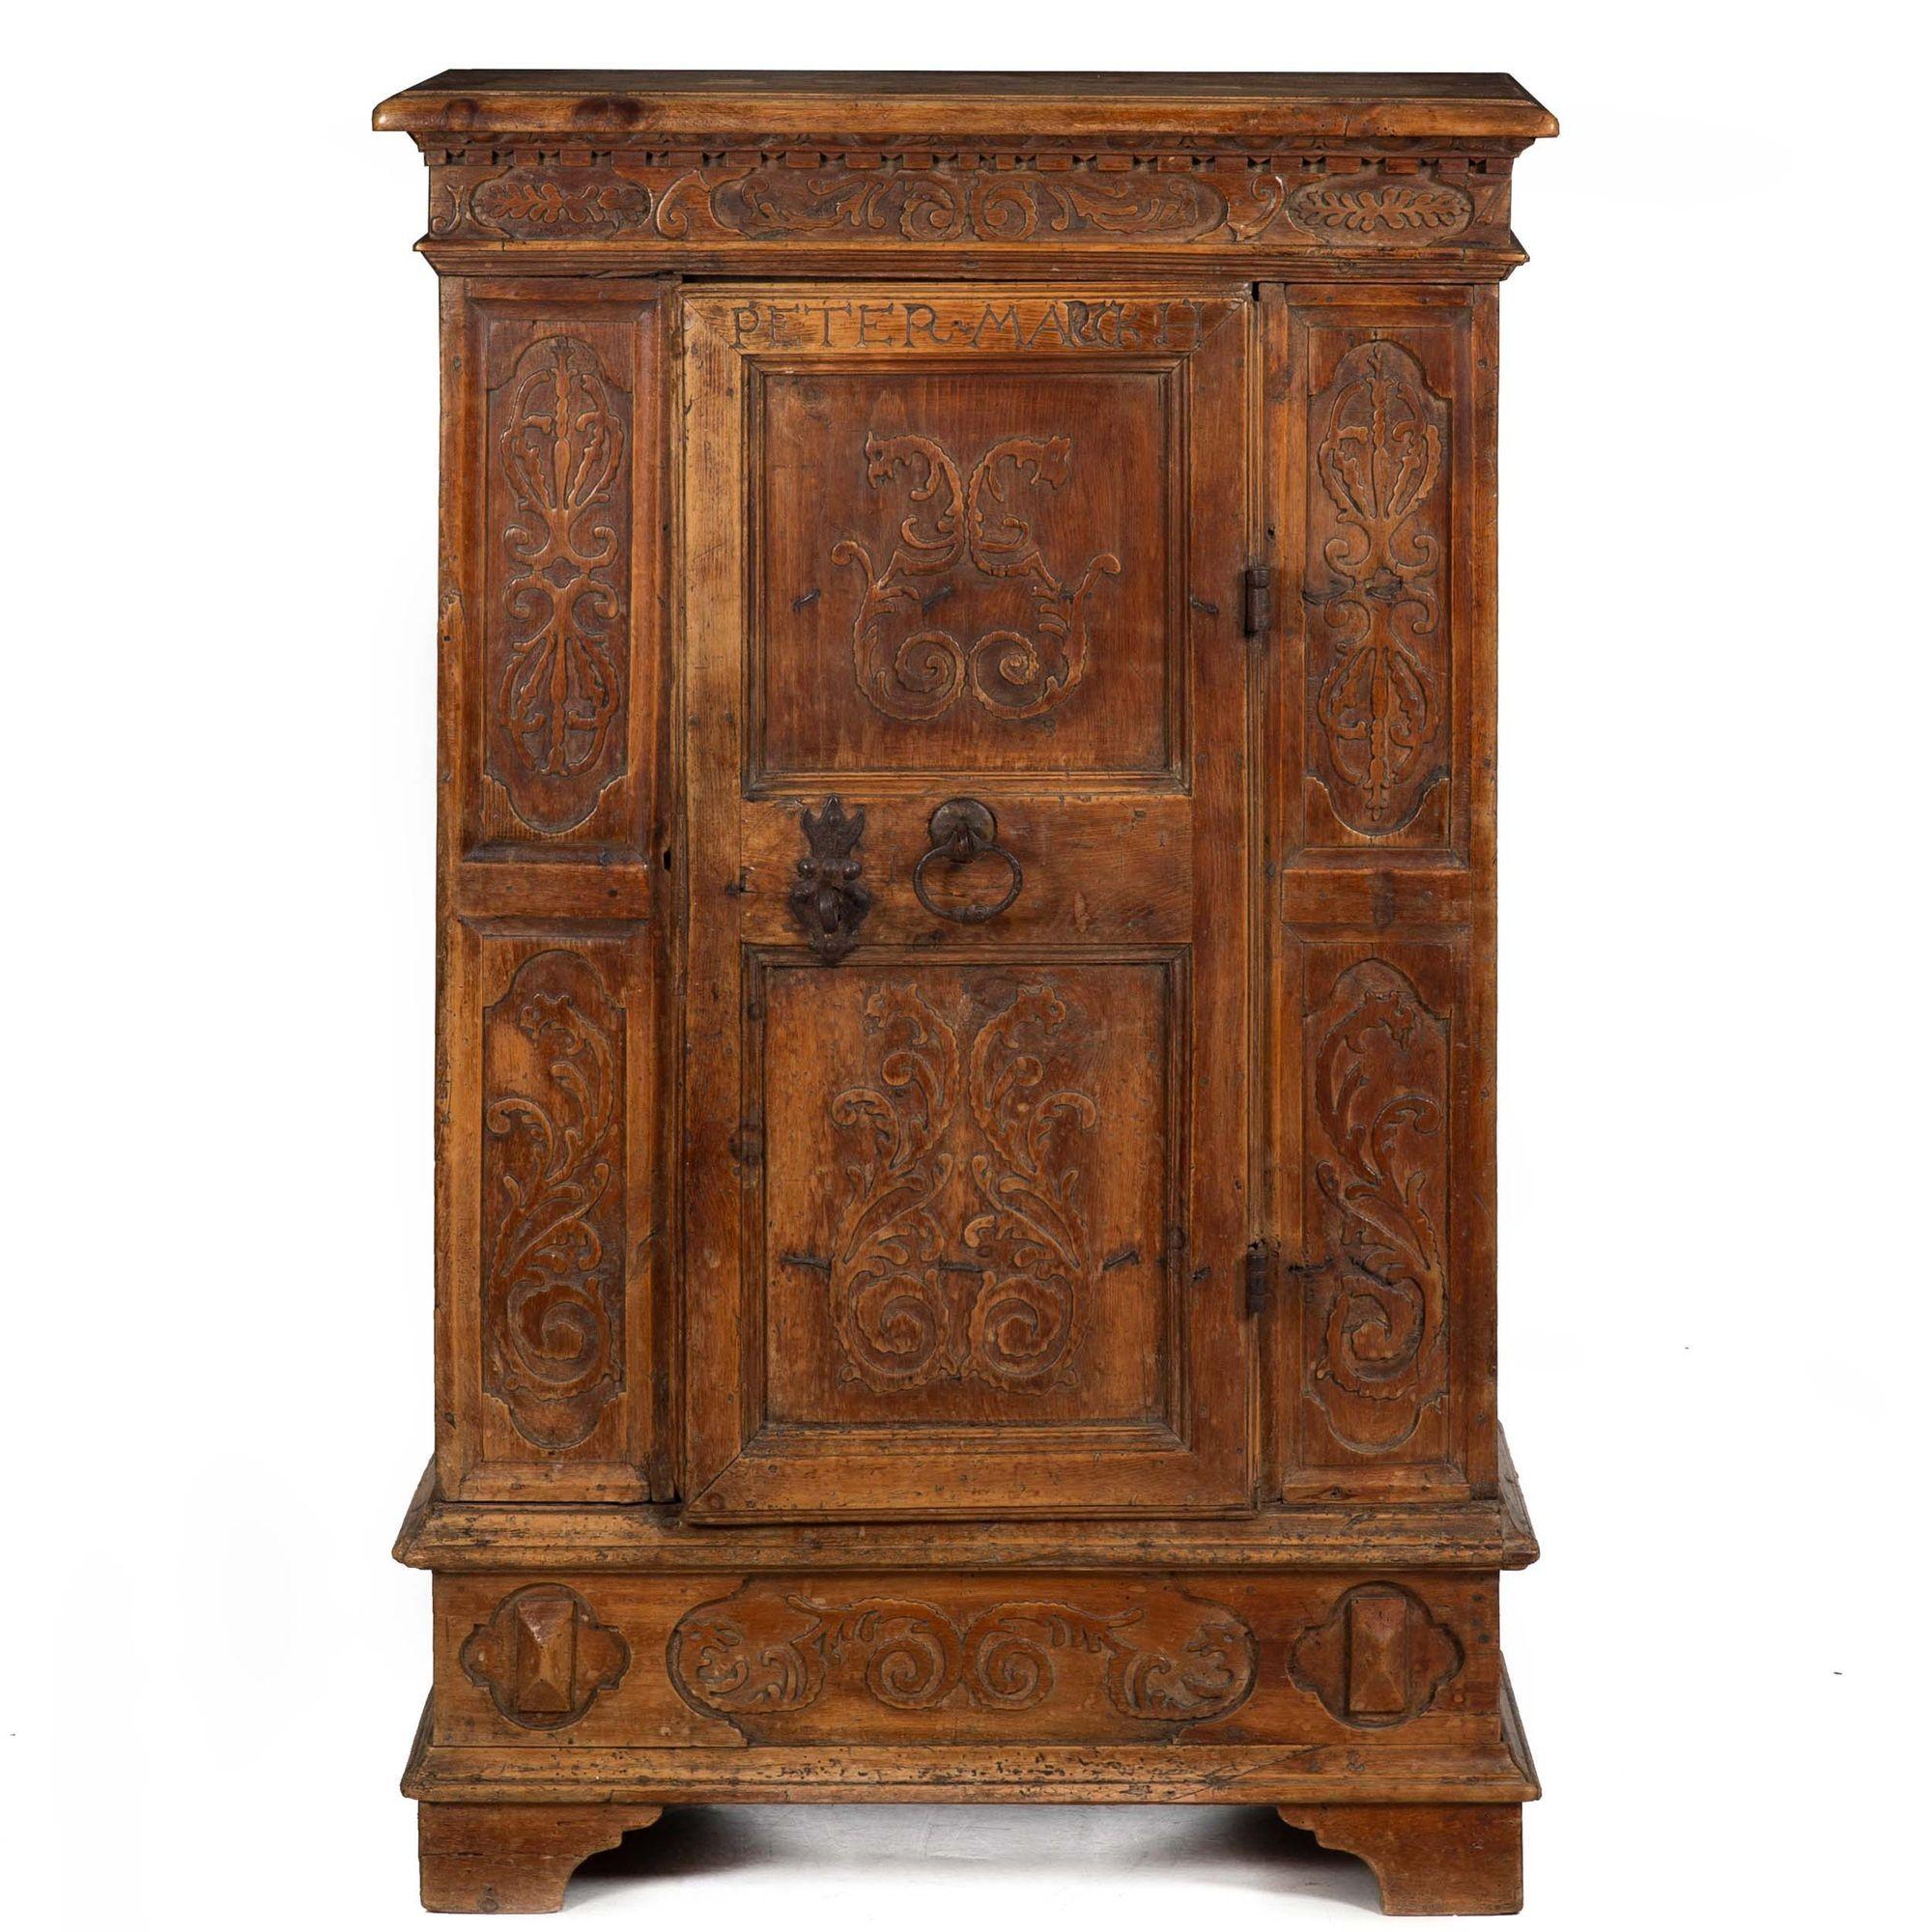 CONTINENTAL HEAVILY WORN AND CARVED ONE-DOOR CUPBOARD OF SMALL DIMENSIONS
Composed of 18th century and later elements, likely constructed in the late 19th/early 20th century  of fantastic proportions
Item # 403LFT18P

A super cool and heavily worn